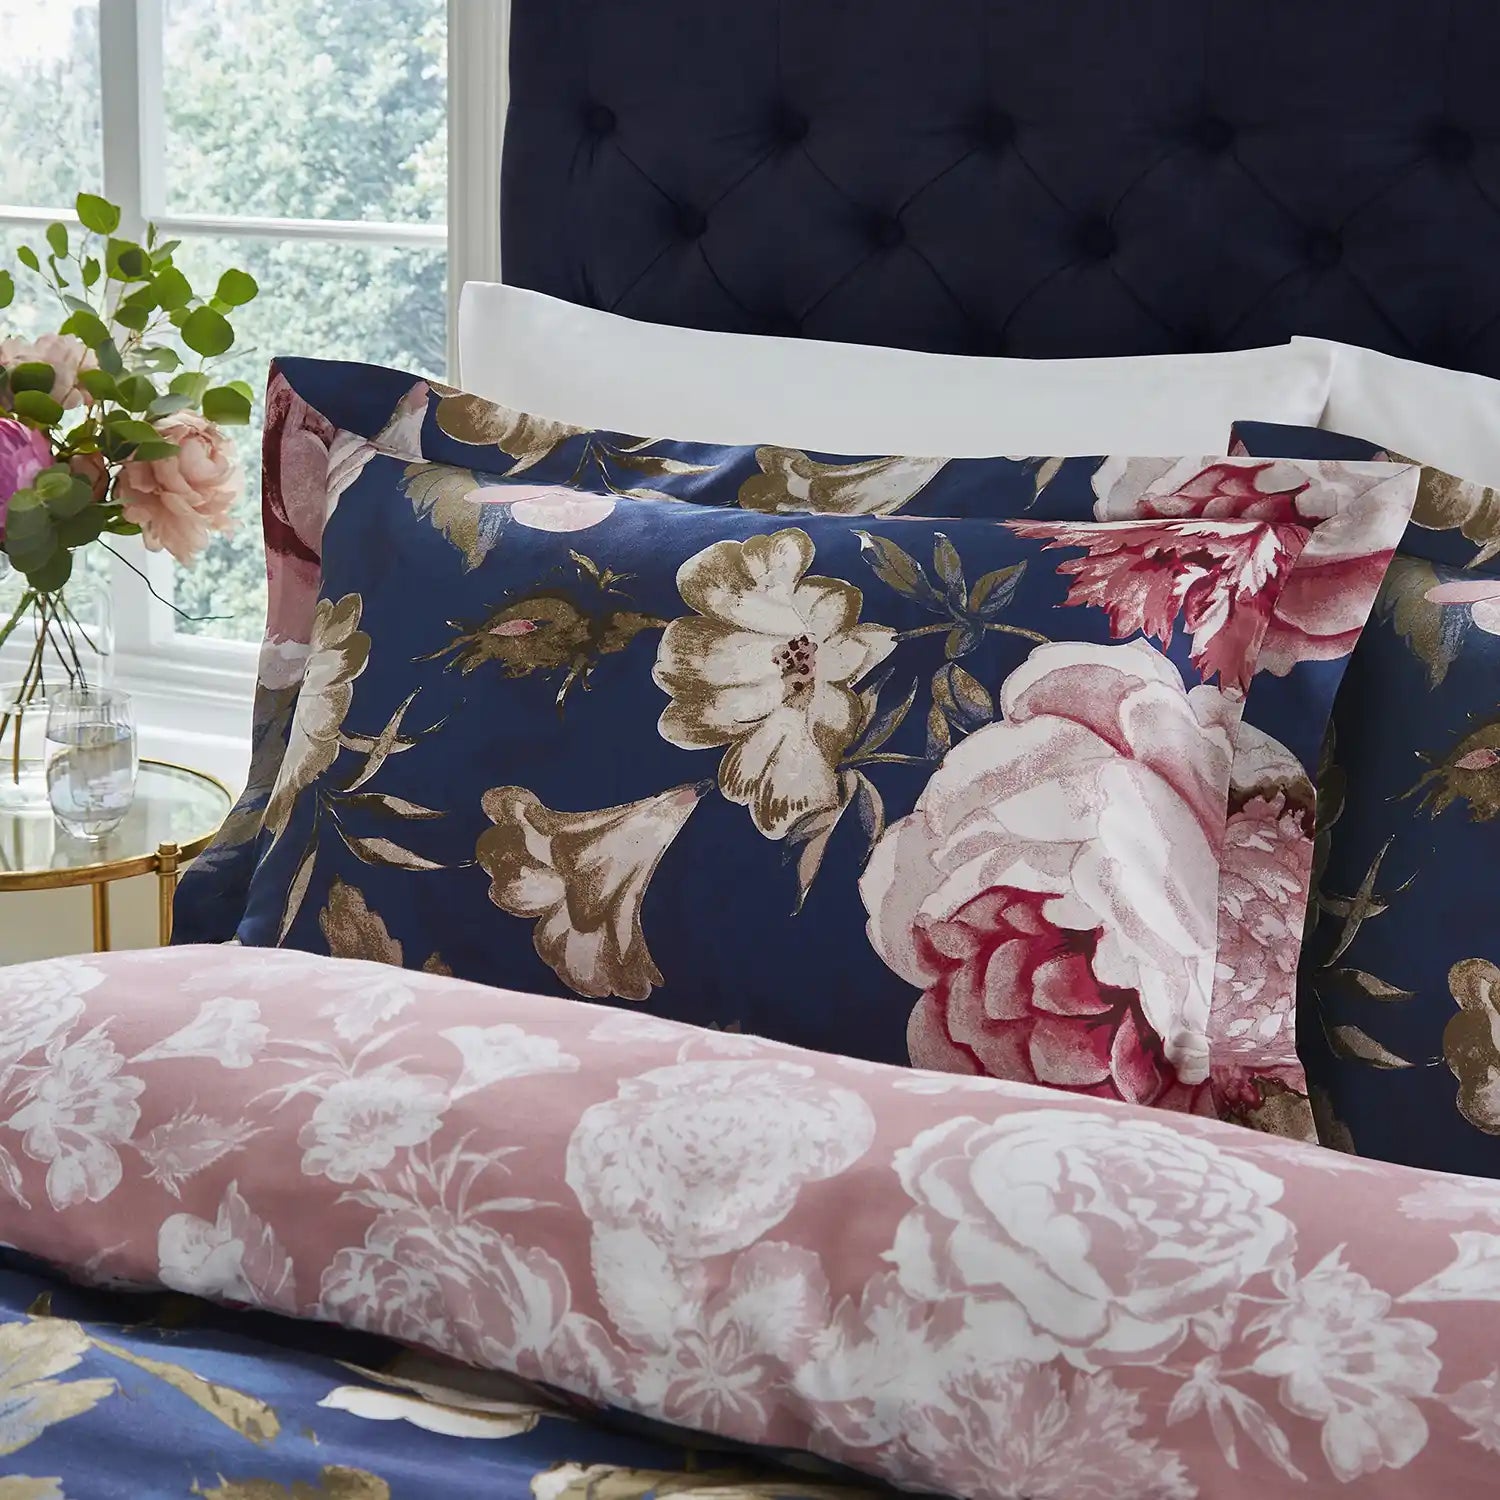 Dorma Constance Floral Pillowcase - Navy/Floral - Oxford Style 1 Shaws Department Stores